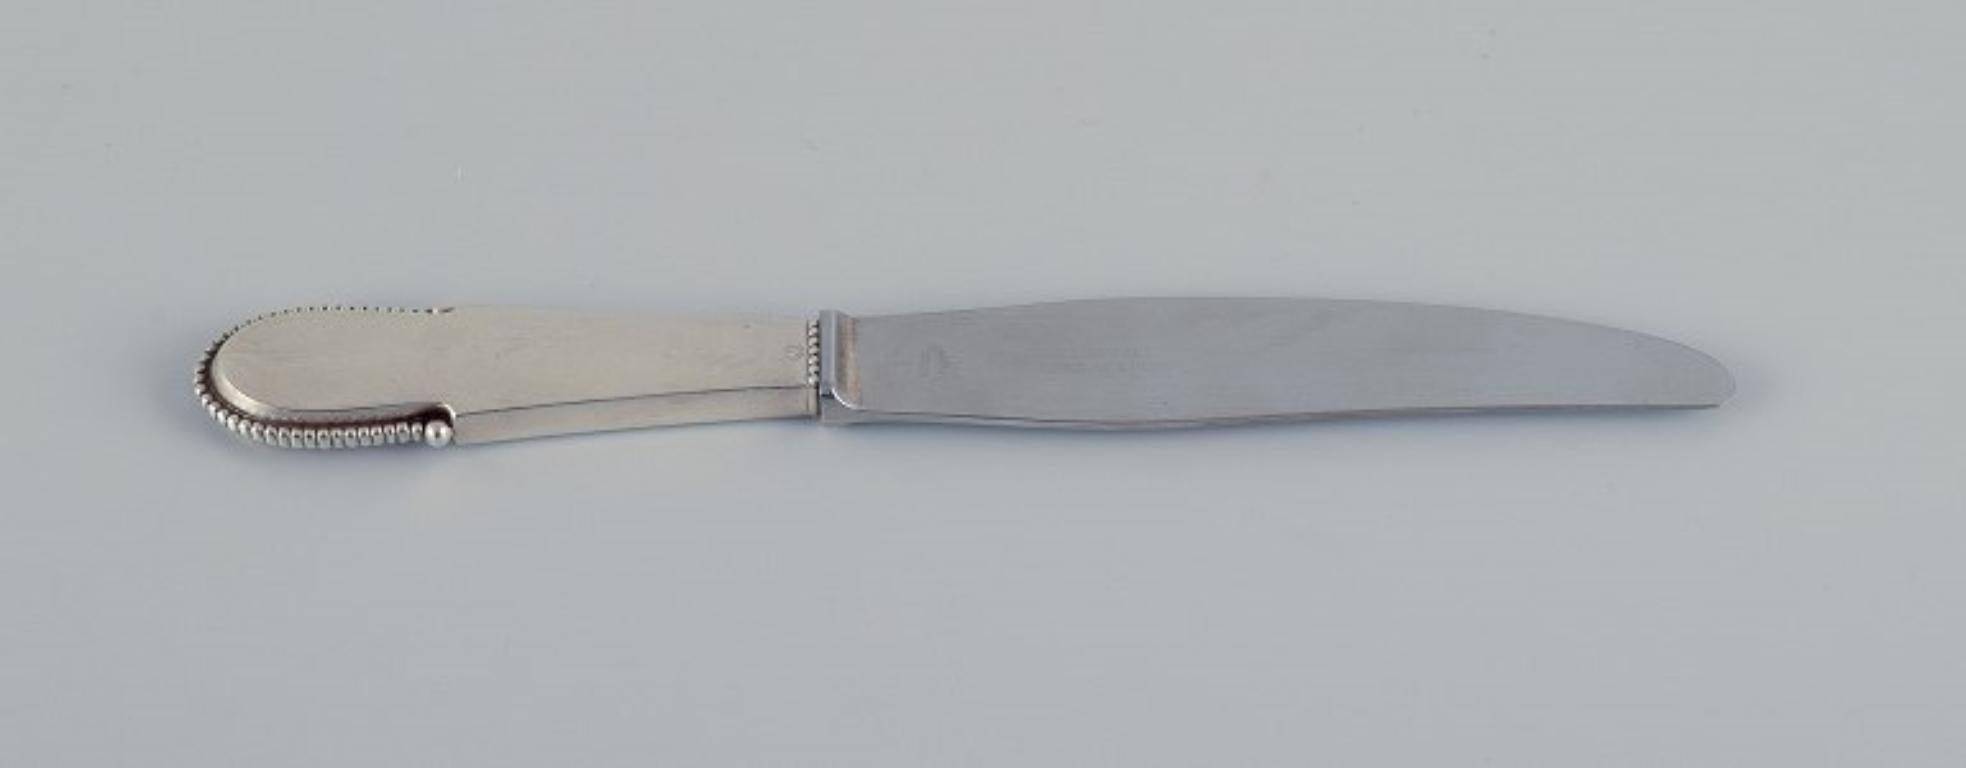 Georg Jensen Beaded.
Two short-handled dinner knives in sterling silver. 
Blade made of stainless steel.
Post 1945 hallmark.
In excellent condition.
Dimensions: L 22.7 cm.